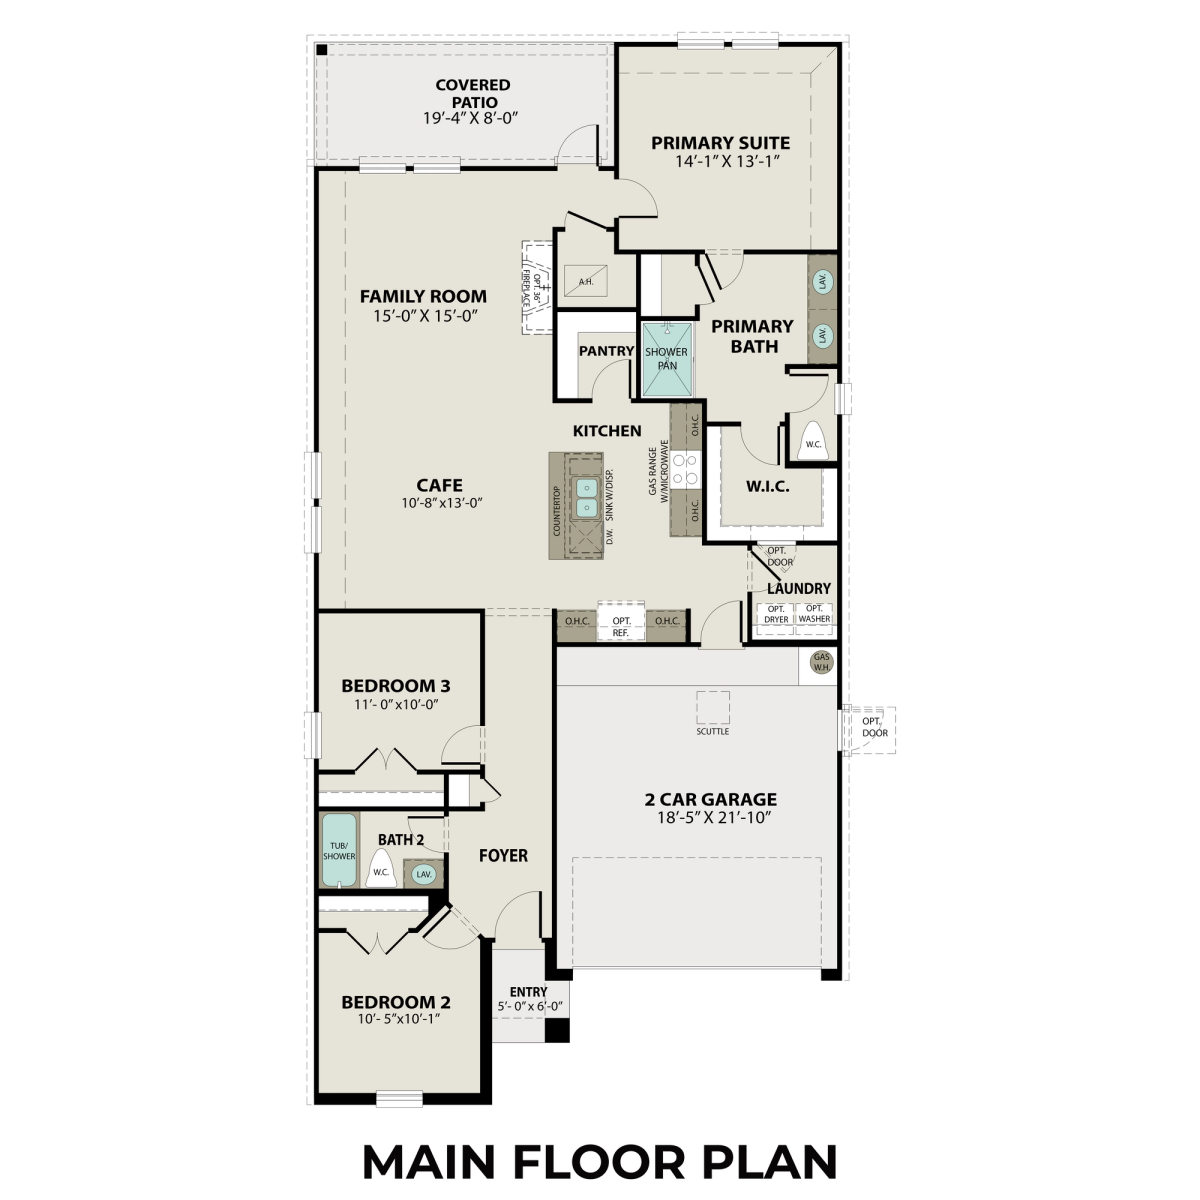 1 - The Laguna A buildable floor plan layout in Davidson Homes' Emberly community.